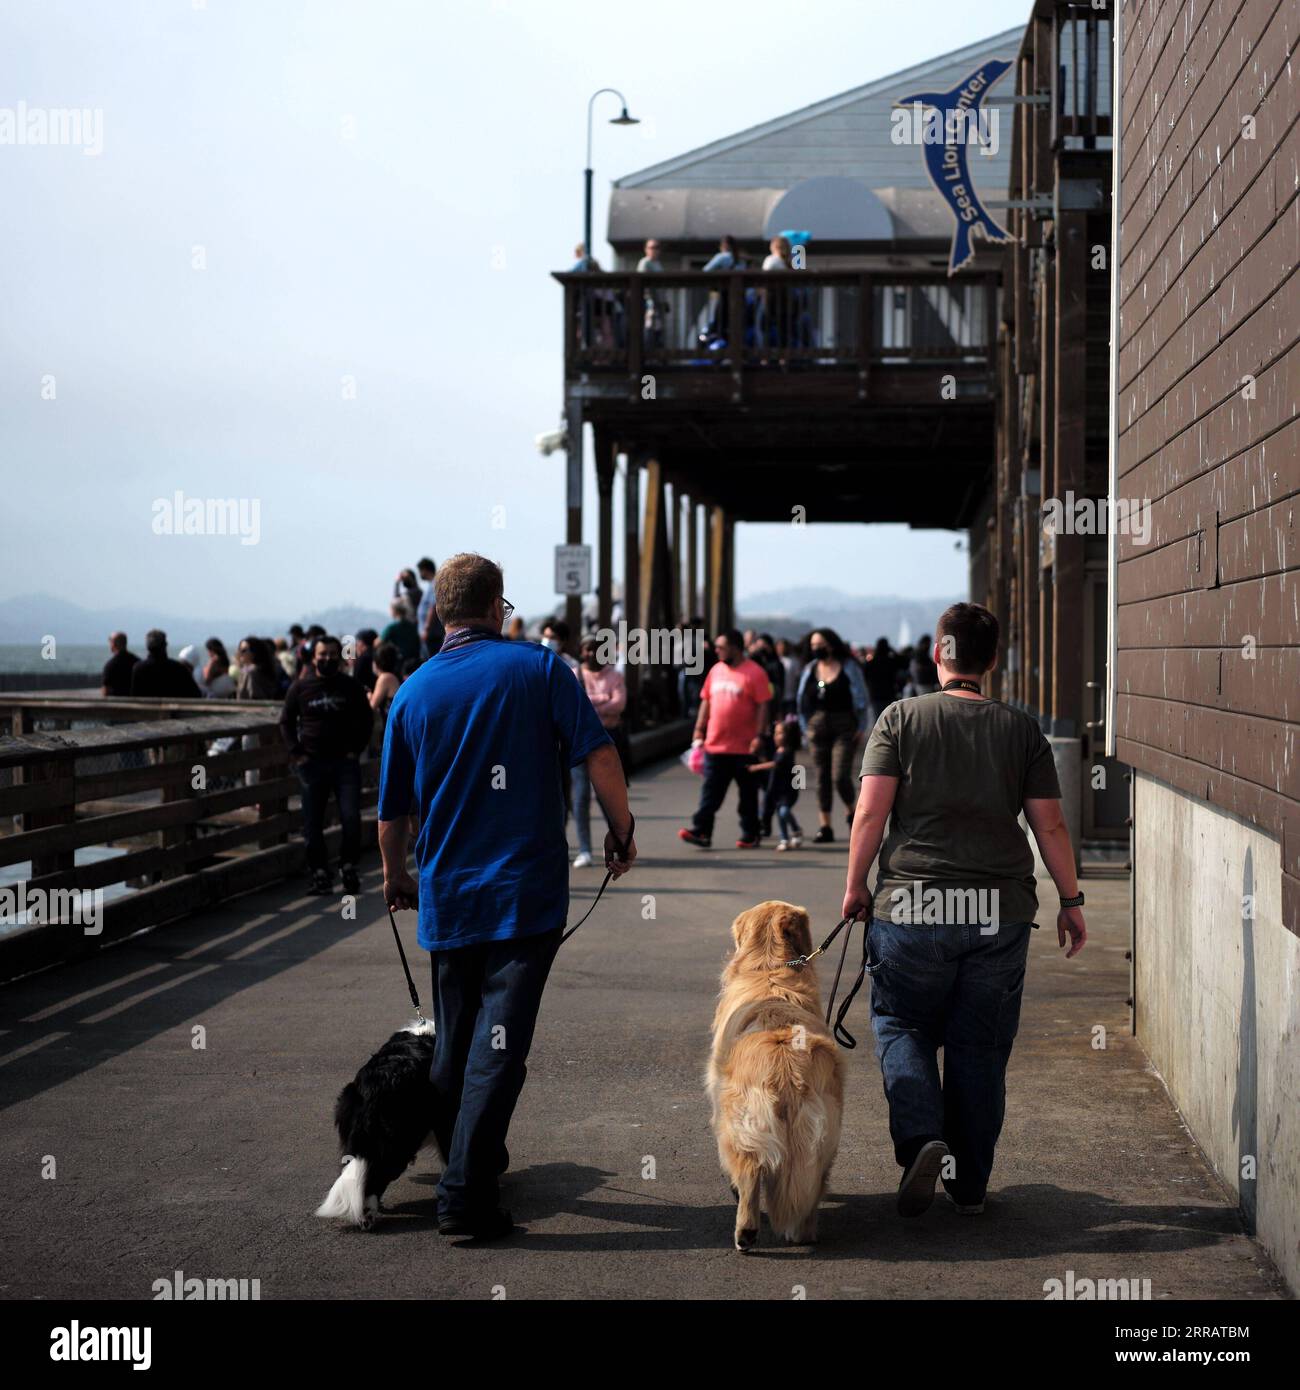 210816 -- SAN FRANCISCO, Aug. 16, 2021 -- People walk their dogs at a pier in San Francisco, the United States, on Aug. 15, 2021. San Francisco Mayor London Breed announced last Thursday that the city will require businesses in certain high-contact indoor sectors to obtain proof of vaccination from their patrons and employees for them to go inside those facilities. The health order requirement for proof of full vaccination for patrons of indoor public settings, including bars, restaurants, clubs and gyms goes into effect on Aug. 20. To preserve jobs while giving time for compliance, the proof Stock Photo